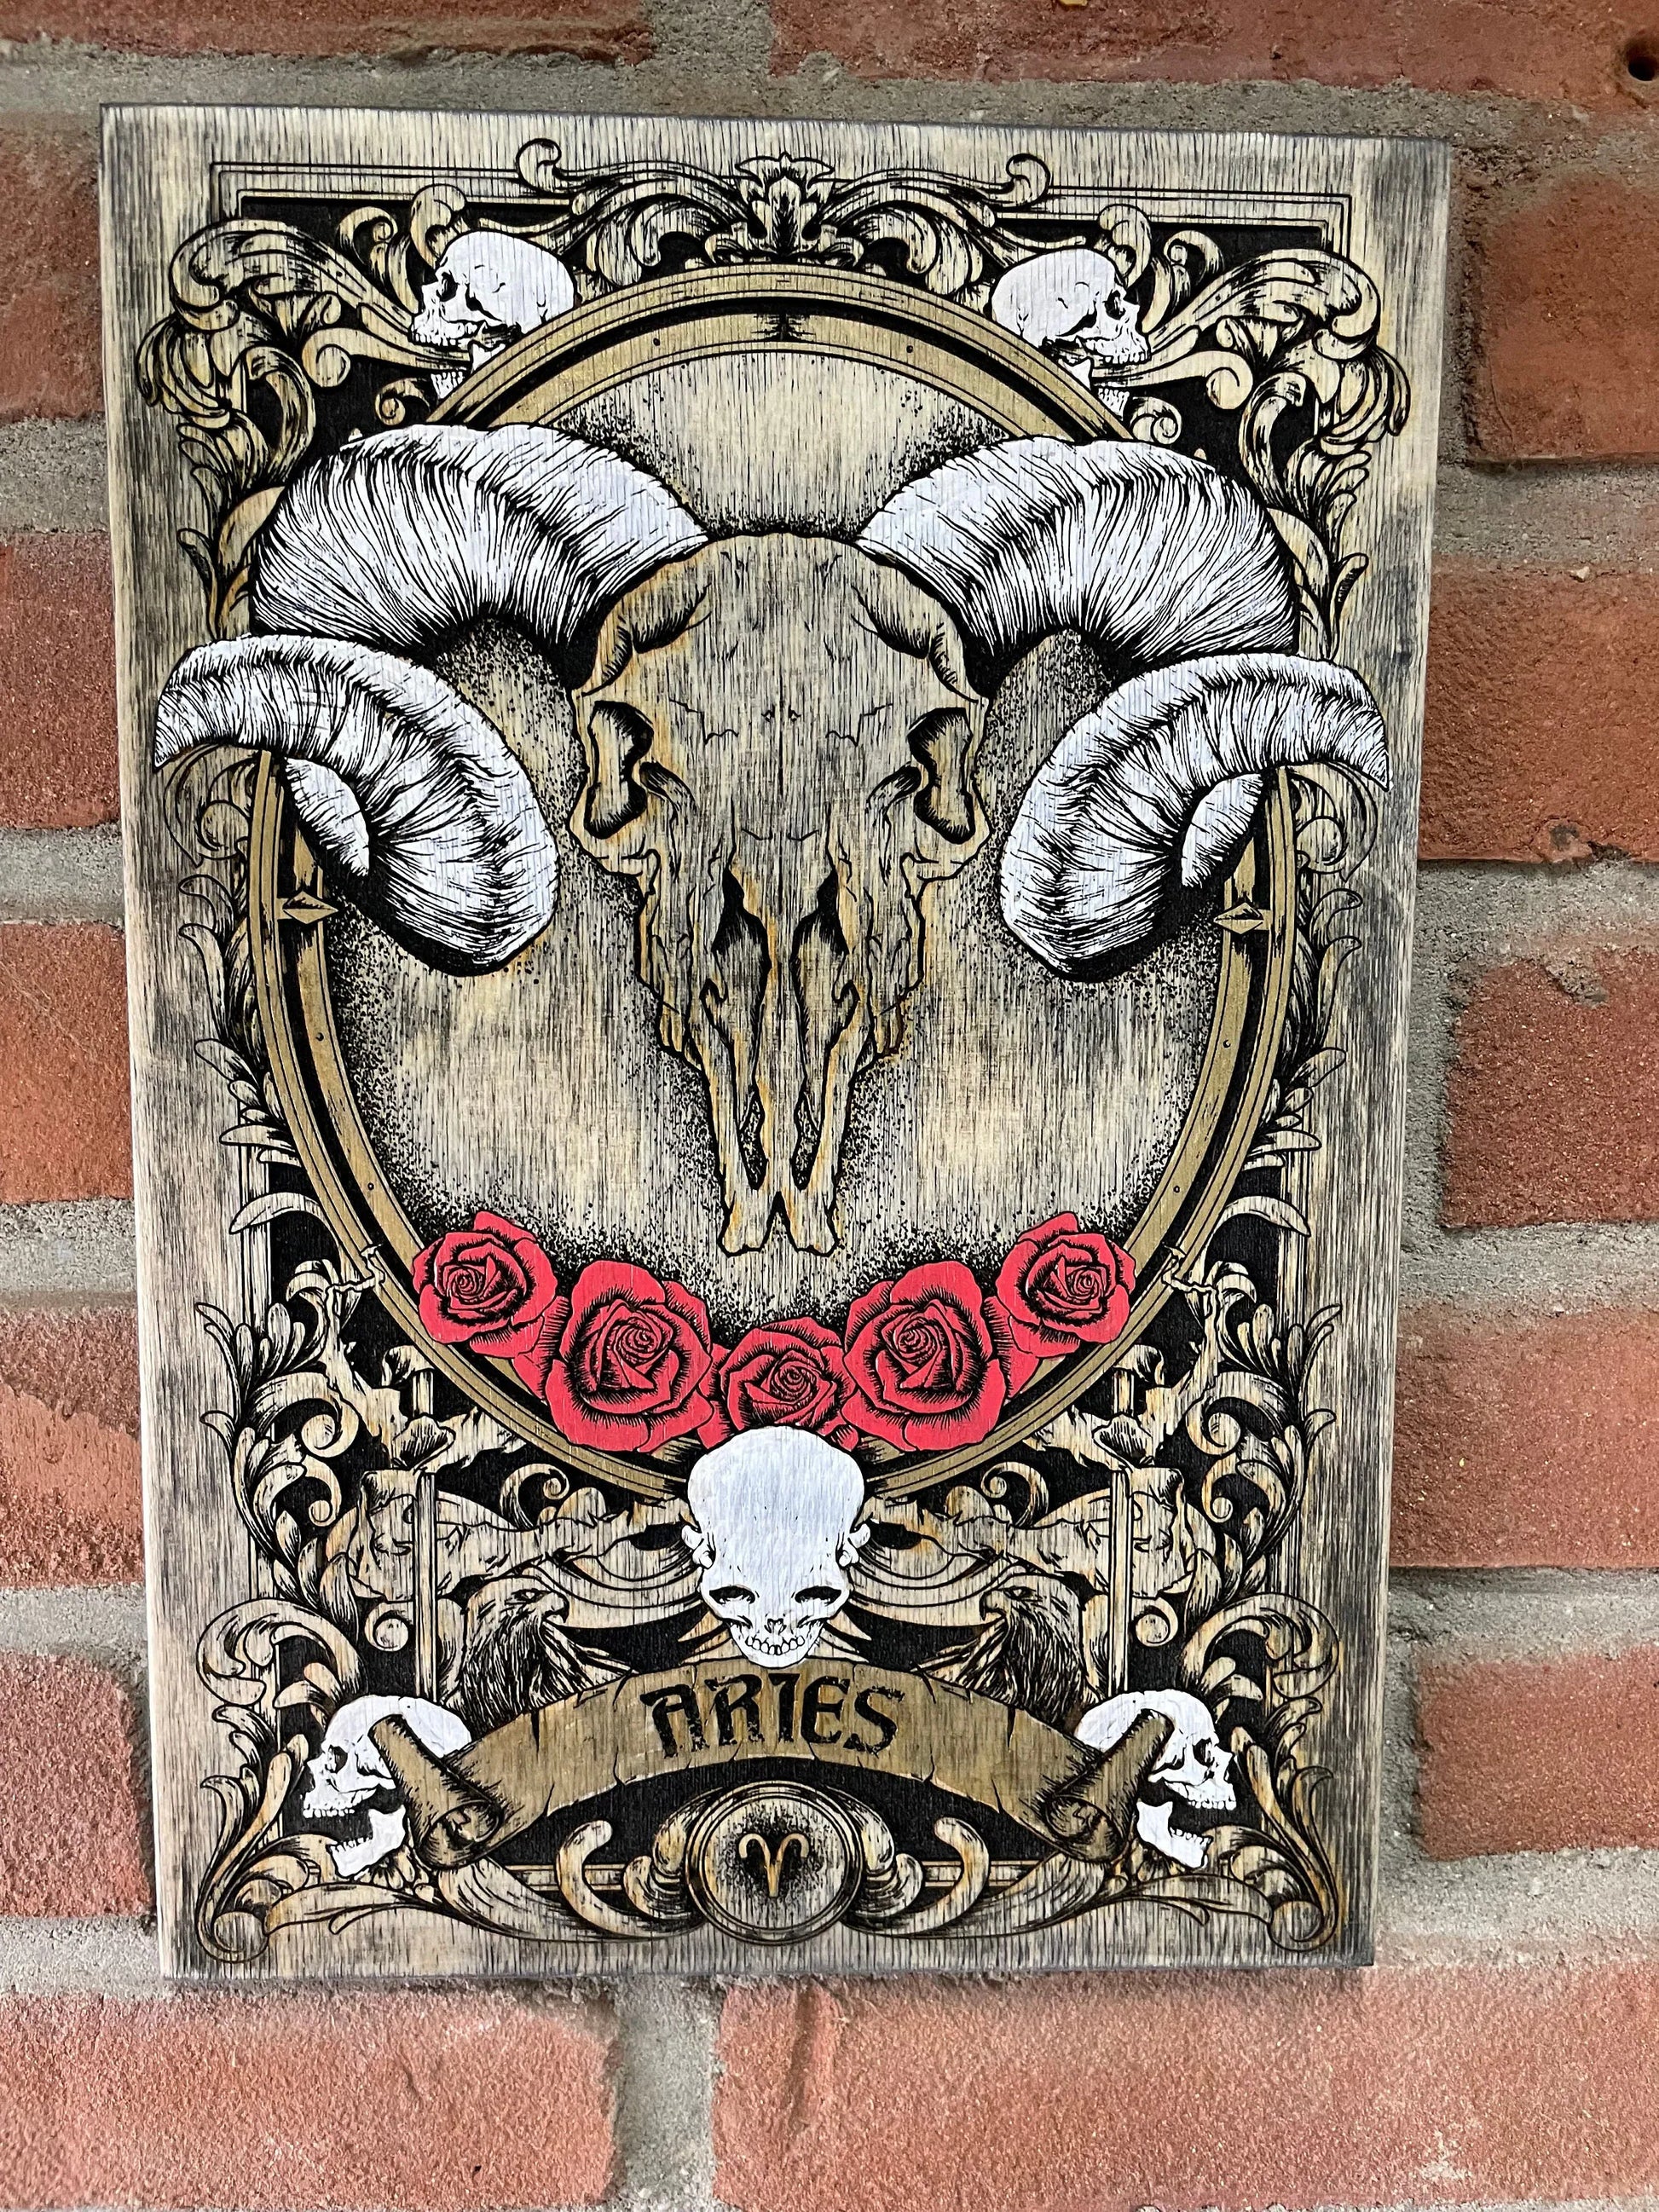 Aries Zodiac Symbol Wood Plaque Horoscope Wood Carving Sign Custom Gift Wall Hanging Figure Astrology Spirituality Personalized Wall gothic. - Forgotten Engravings aries-zodiac-symbol-wood-pl